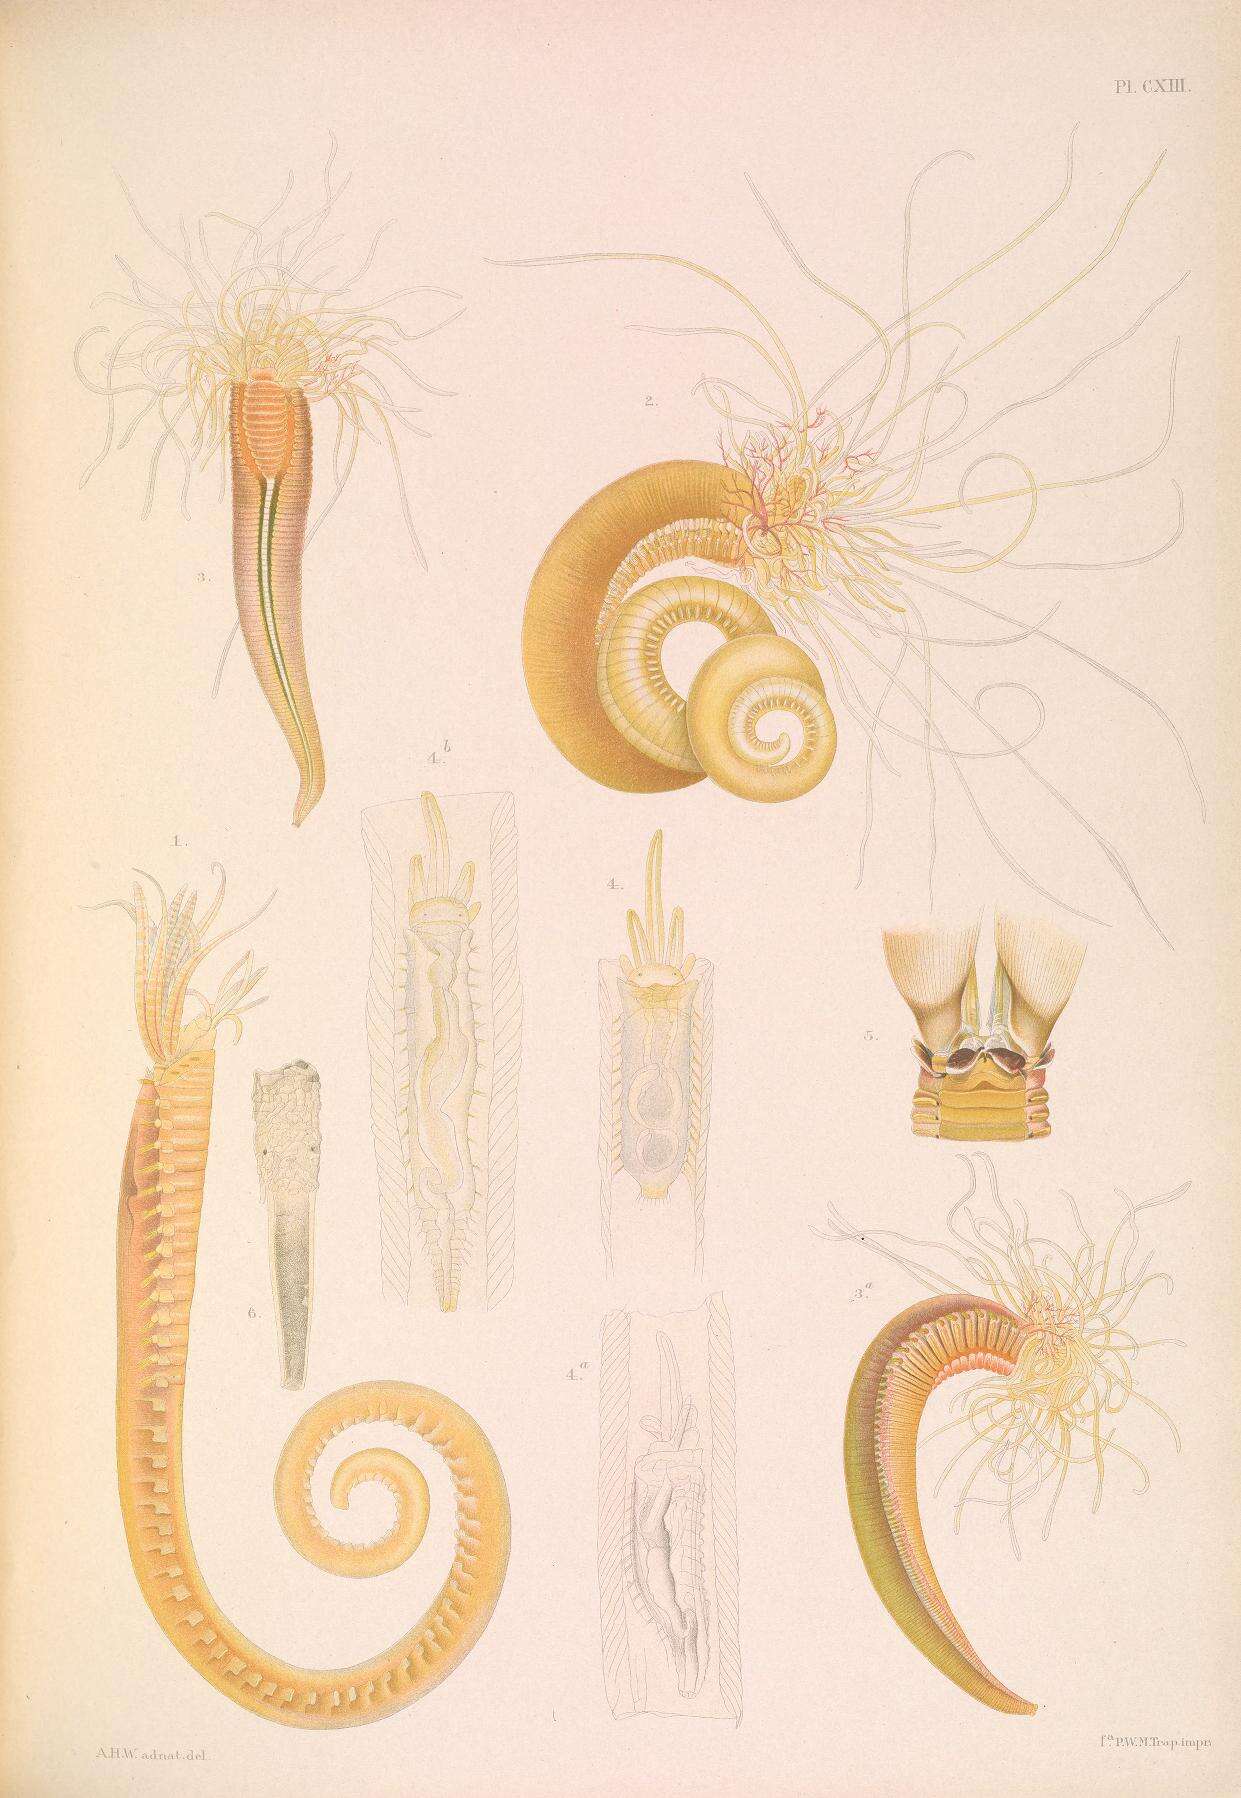 Image of double spiral worm